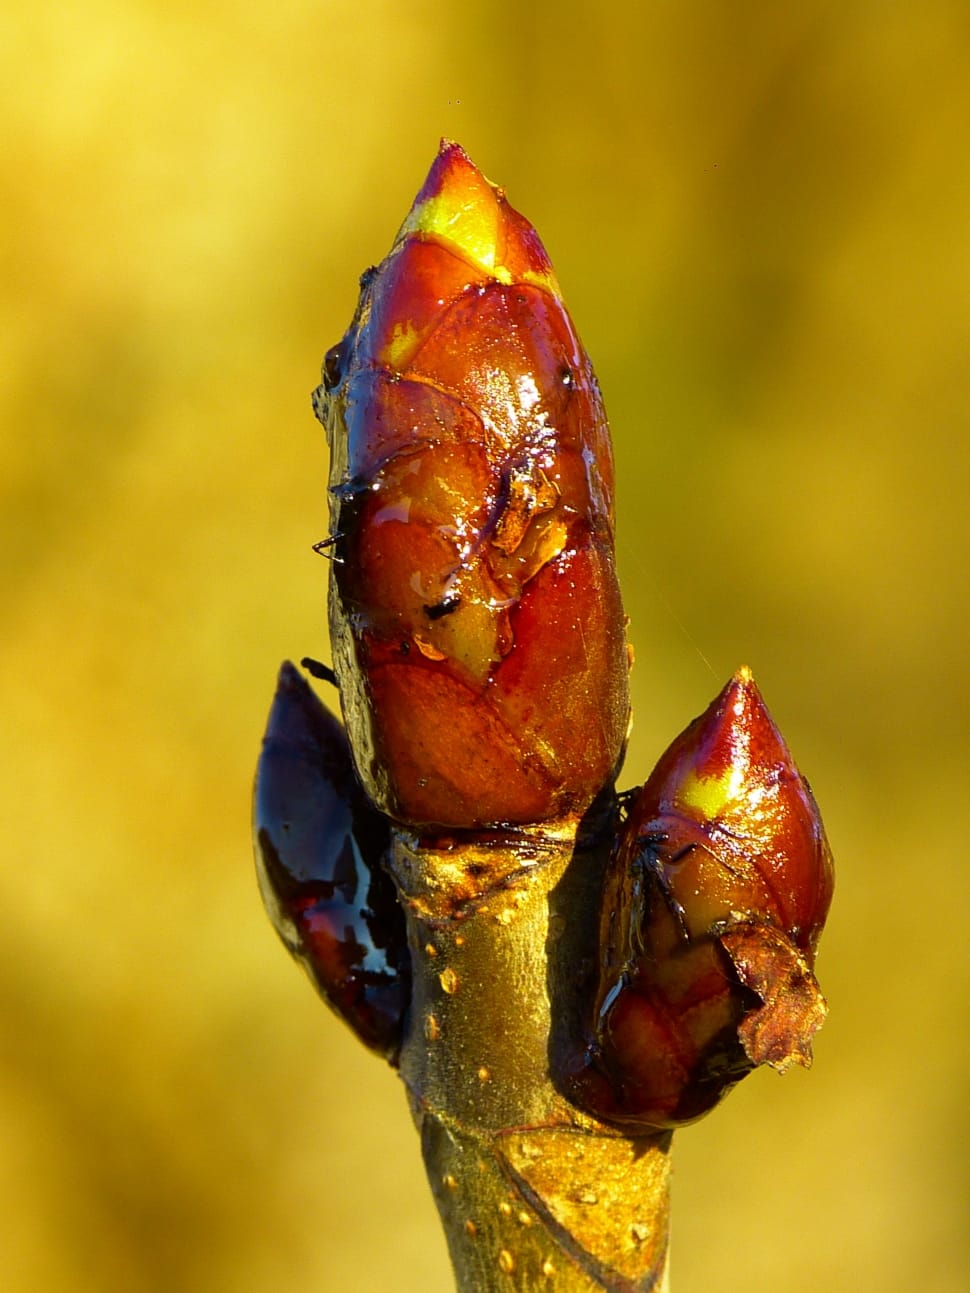 Tree, Chestnut, Bud, Chestnut Bud, food and drink, close-up preview